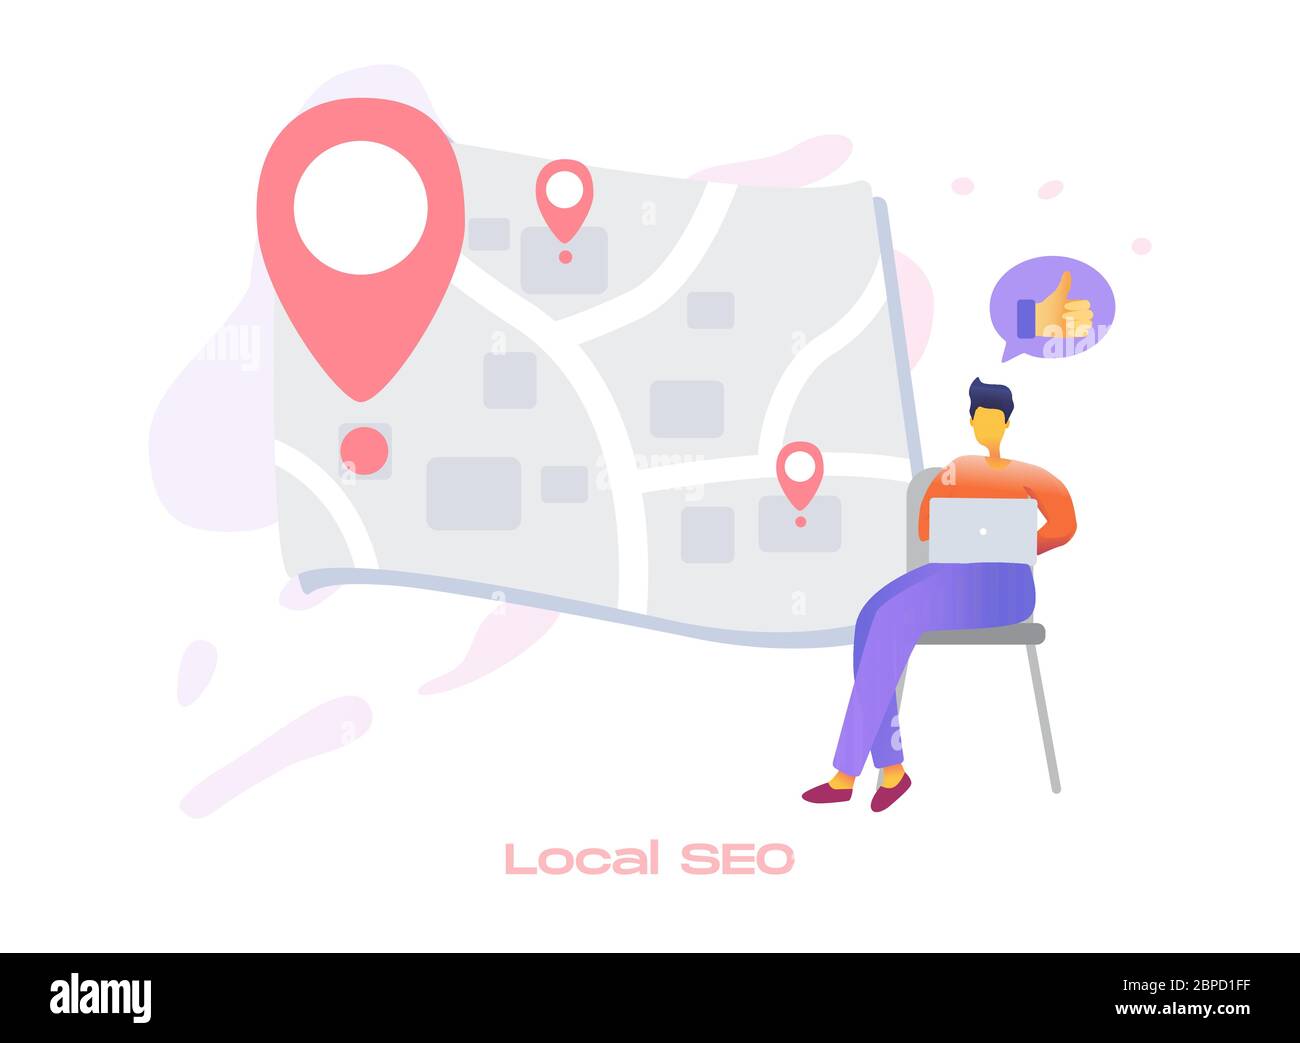 Local SEO icon for search engine optimization service. Market analytics, customer feedback analysis. Local SEO, reputation management, mobile SEO metaphors.Vector flat 3d style design illustration. Stock Vector